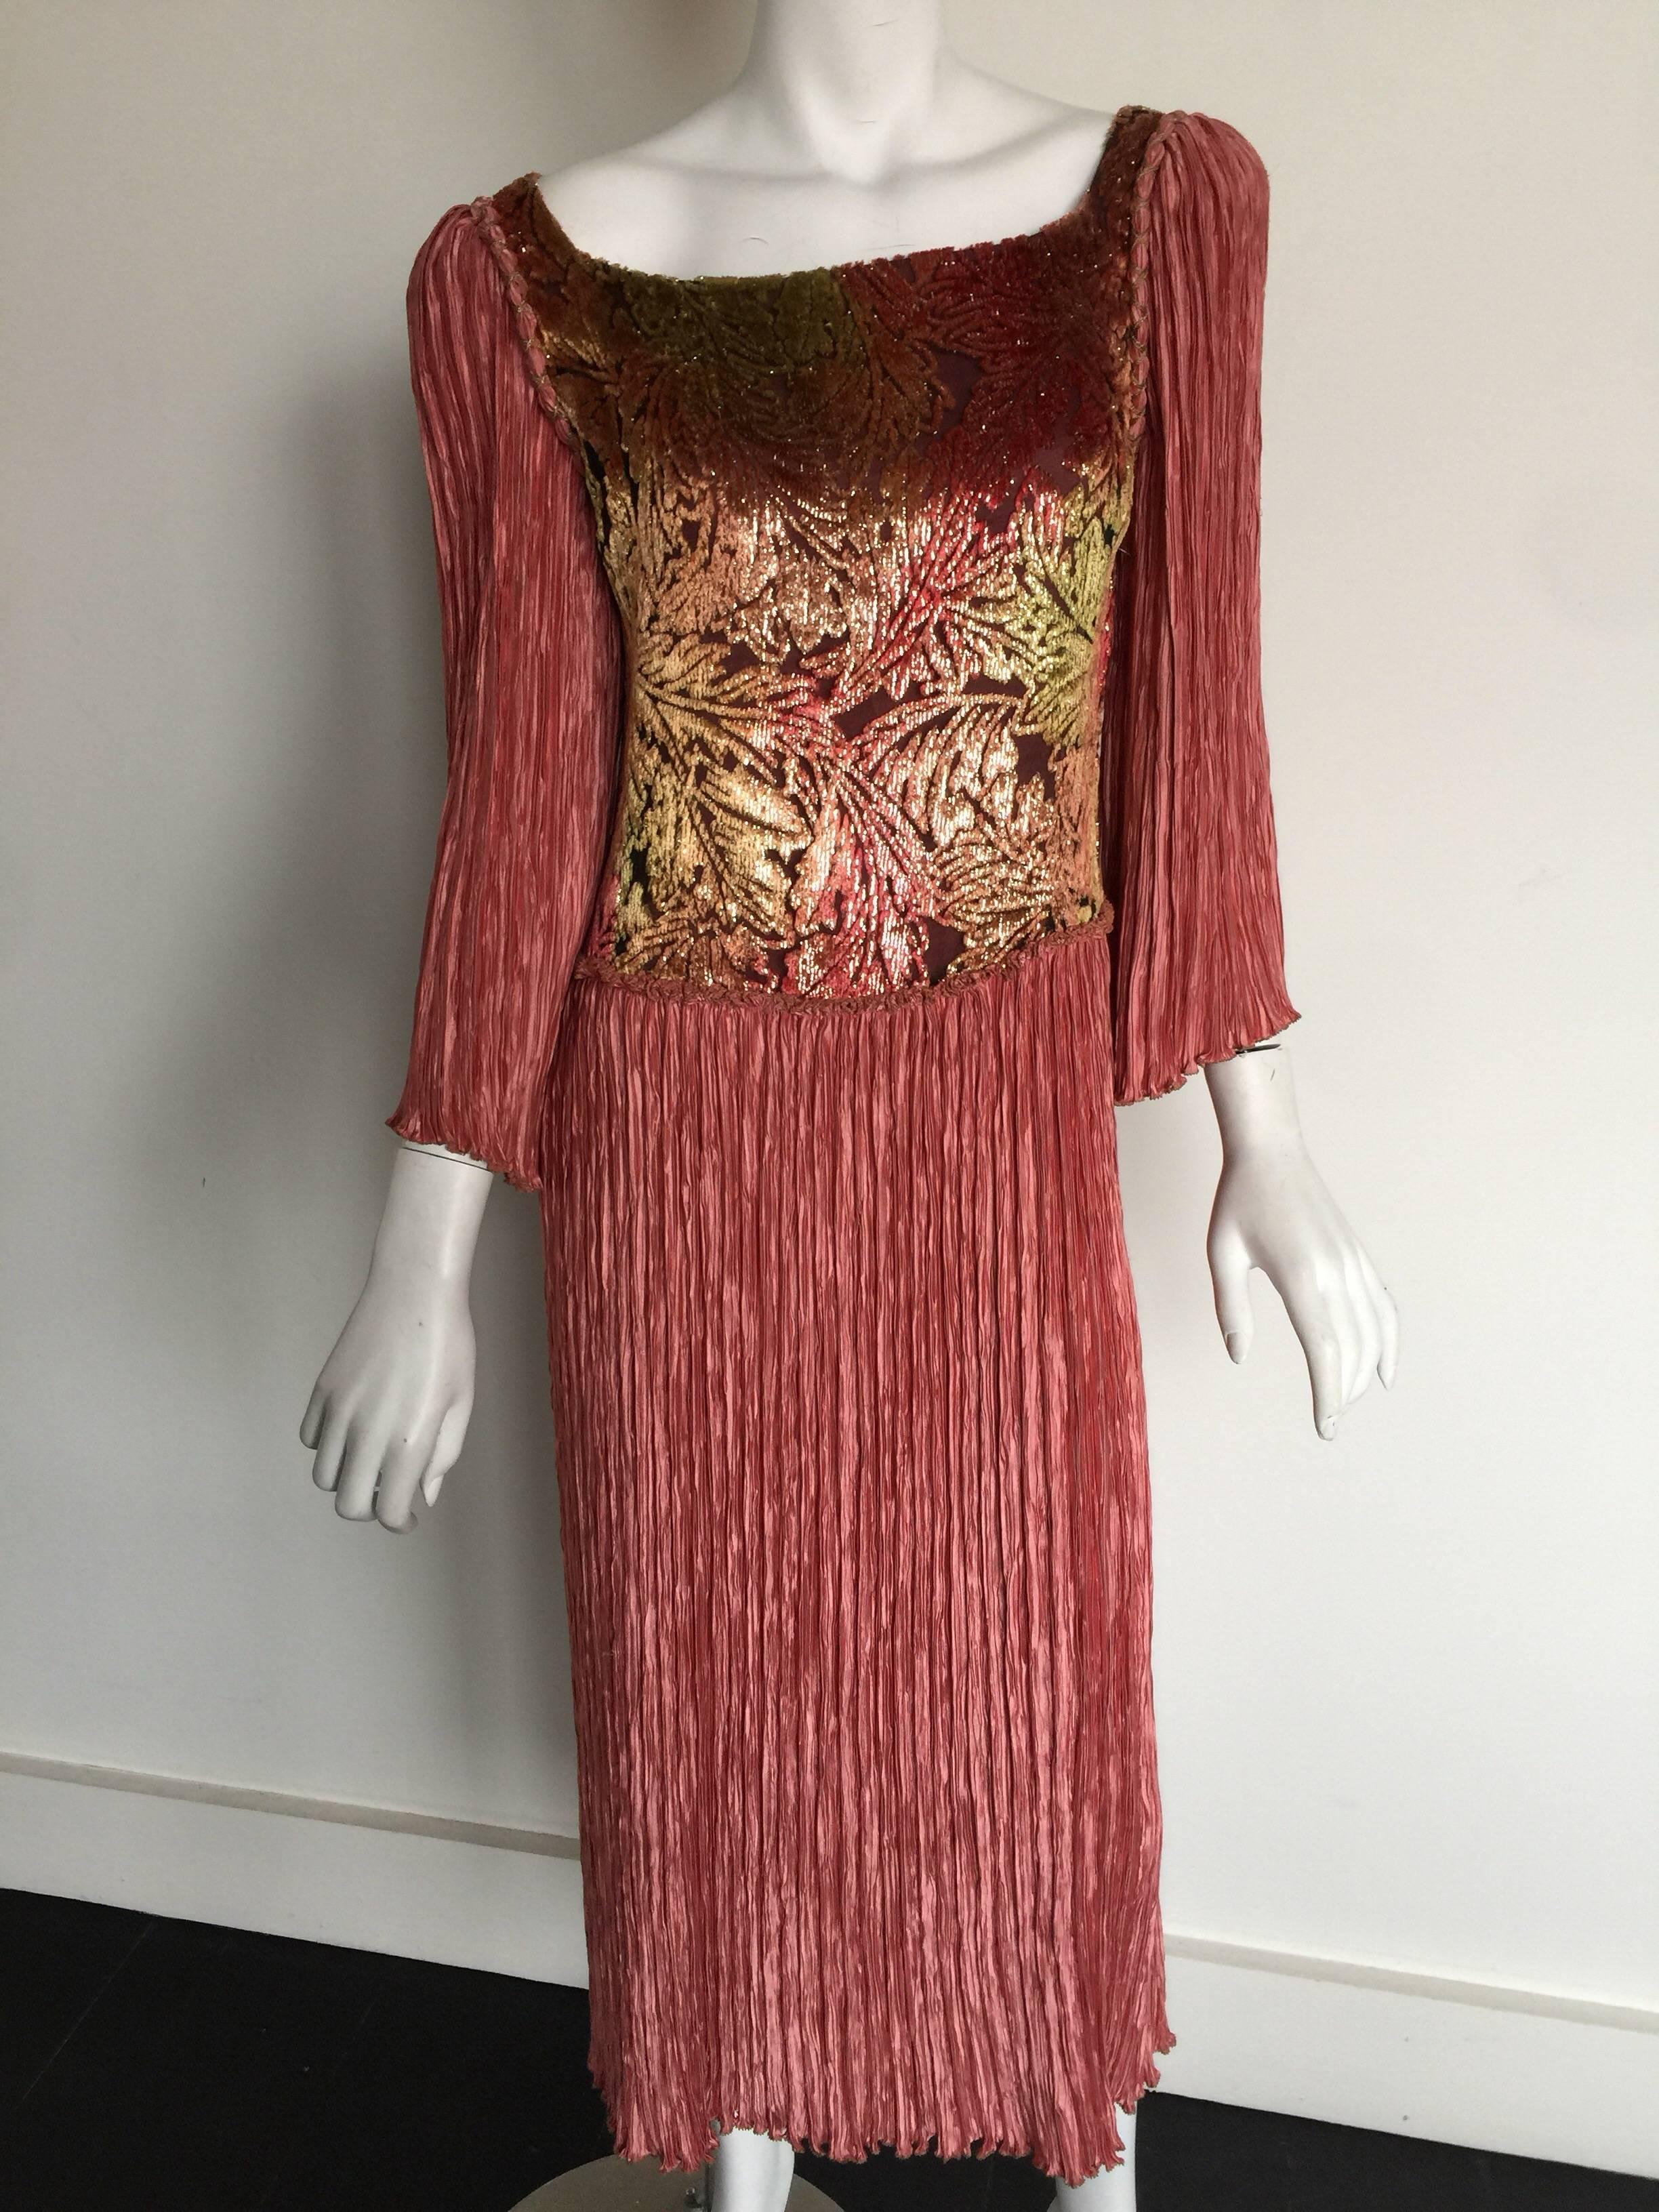 This Mary McFadden dress is a dusty pink silk with a metallic velvet bib front.  The velvet print looks like gold red autumn leaves.  Mary McFadden's micro pleated fabric is a tribute to Mario Fortuny.  The dress has the original Saks Fifth Avenue